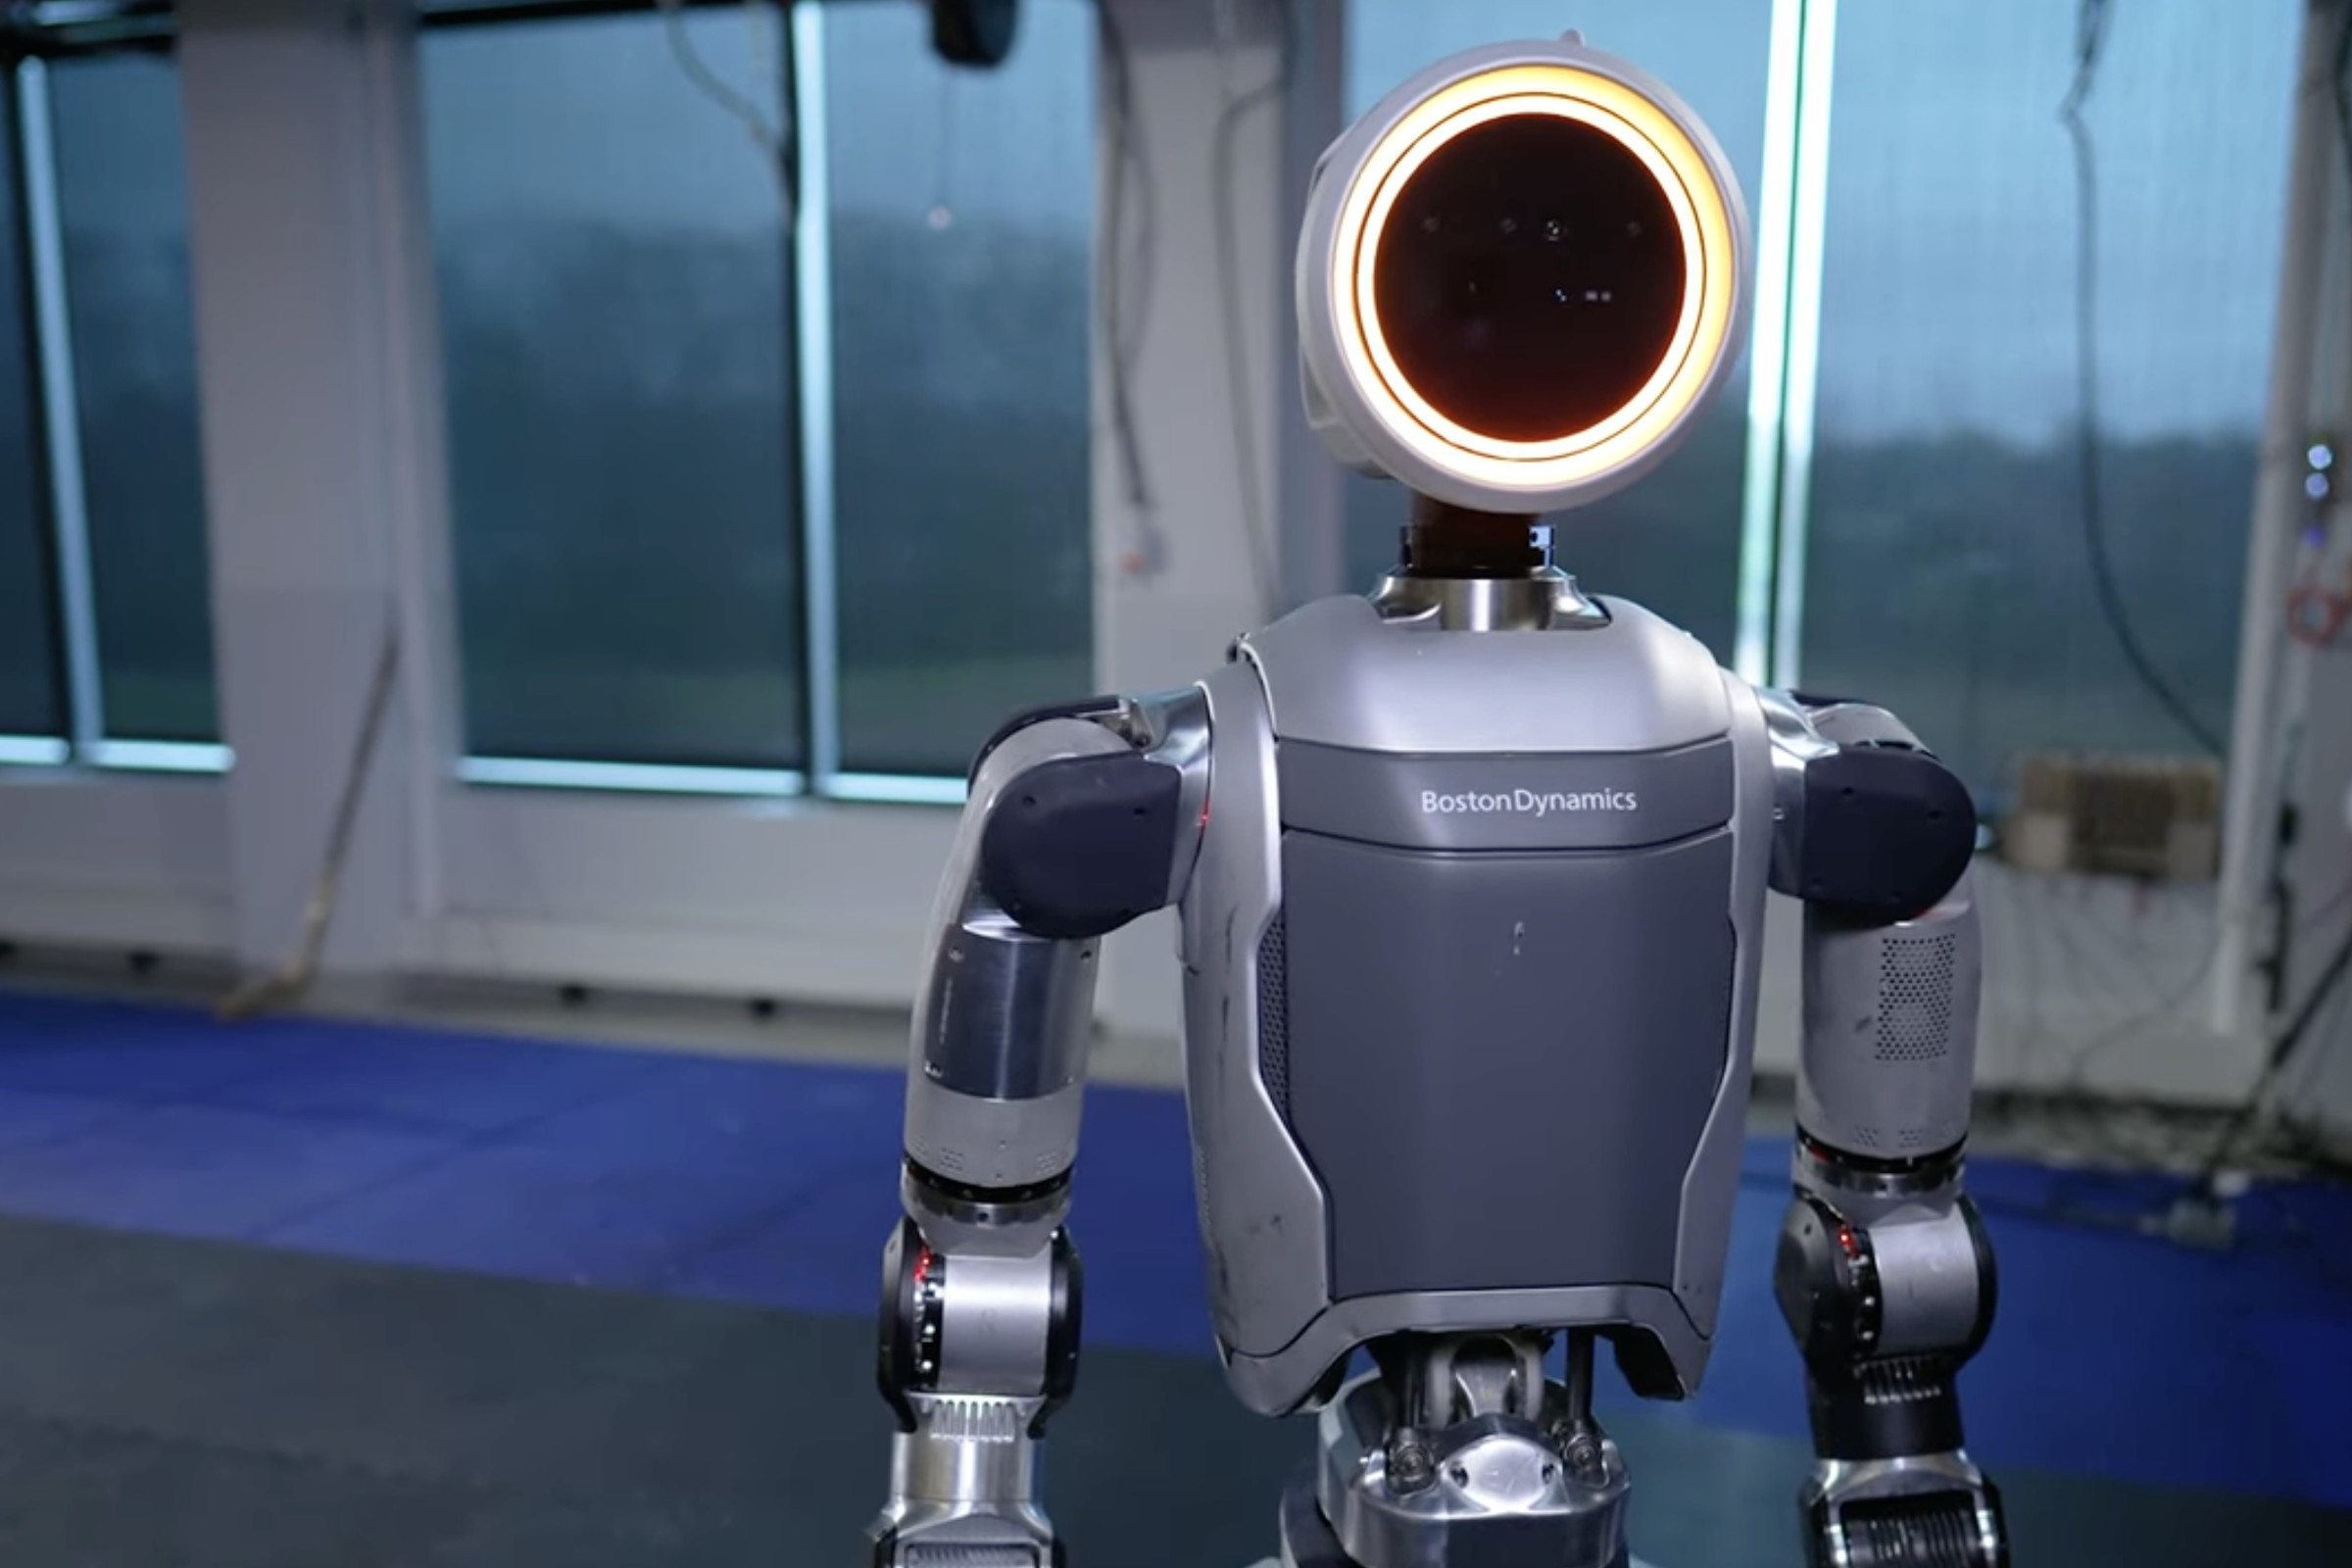 An image showing the new all-electric Atlas robot